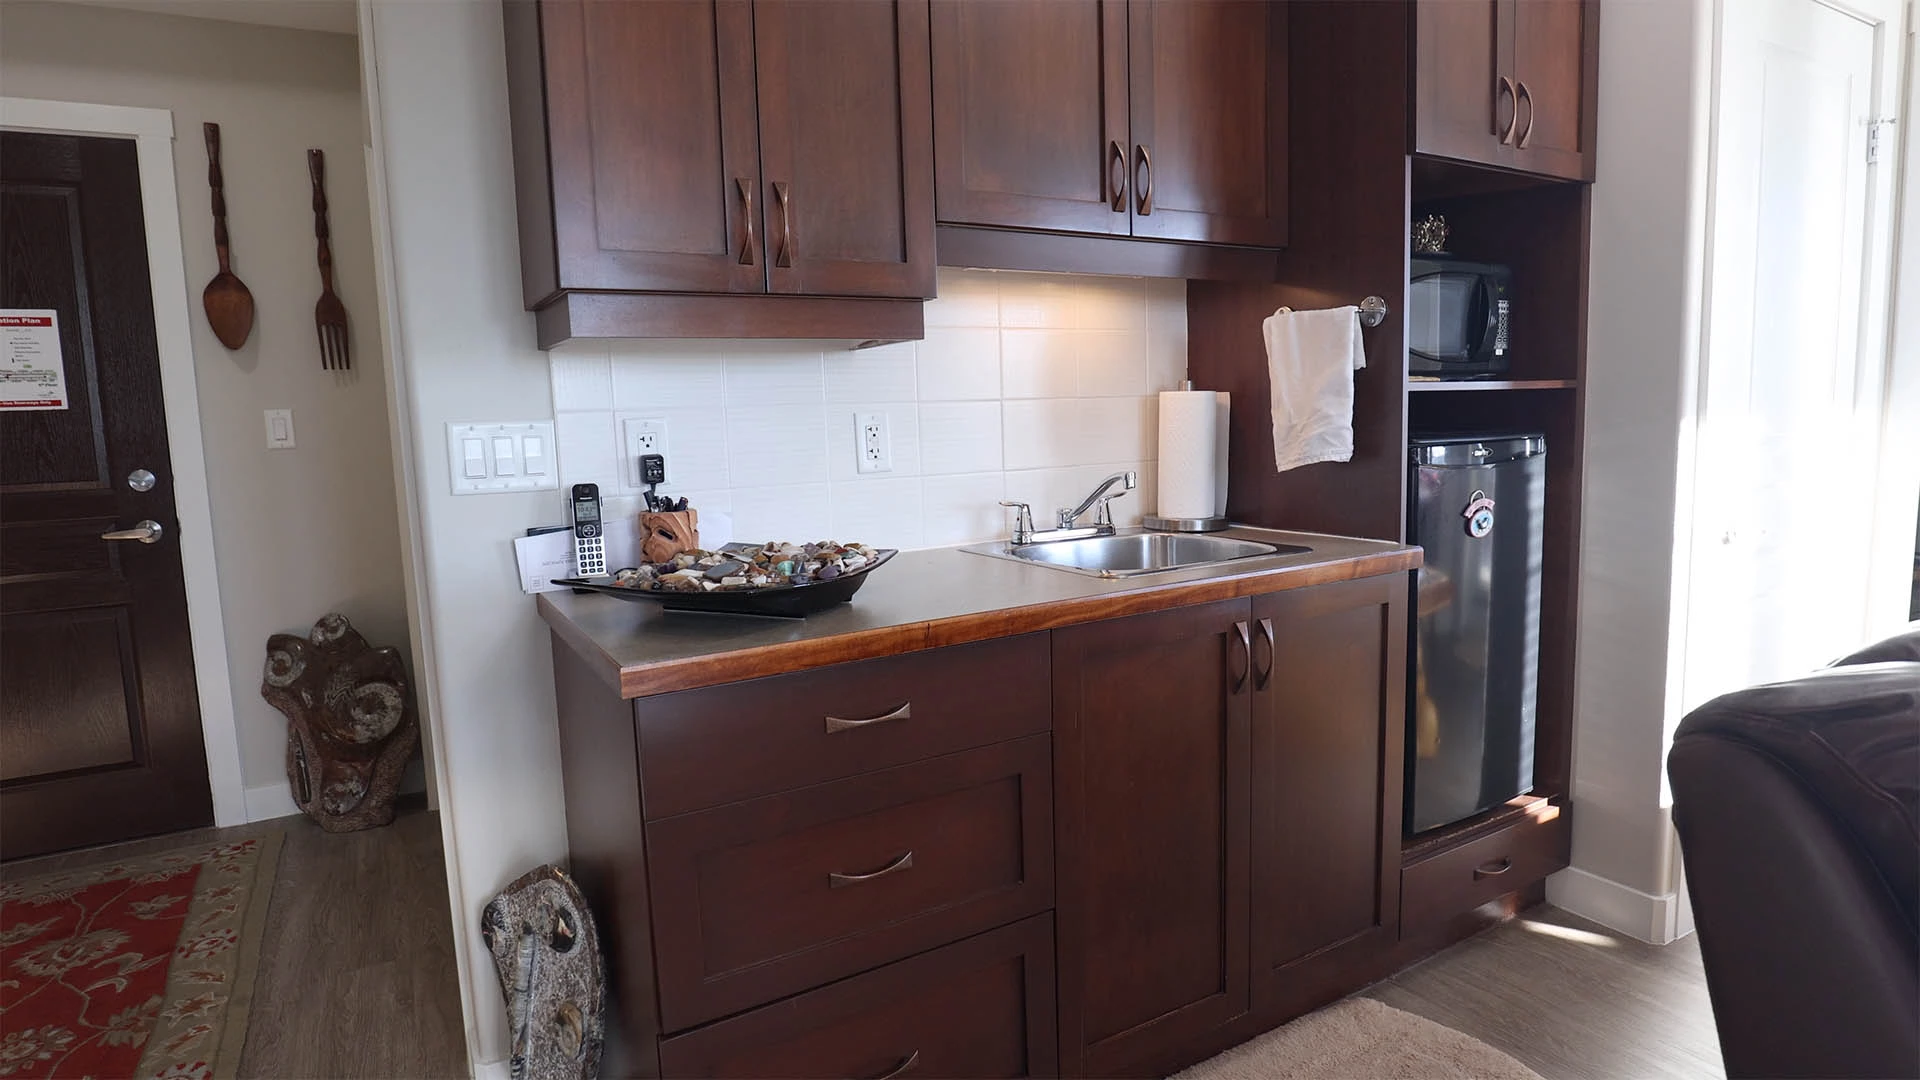 Small kitchen with brown cupboards and counter tops